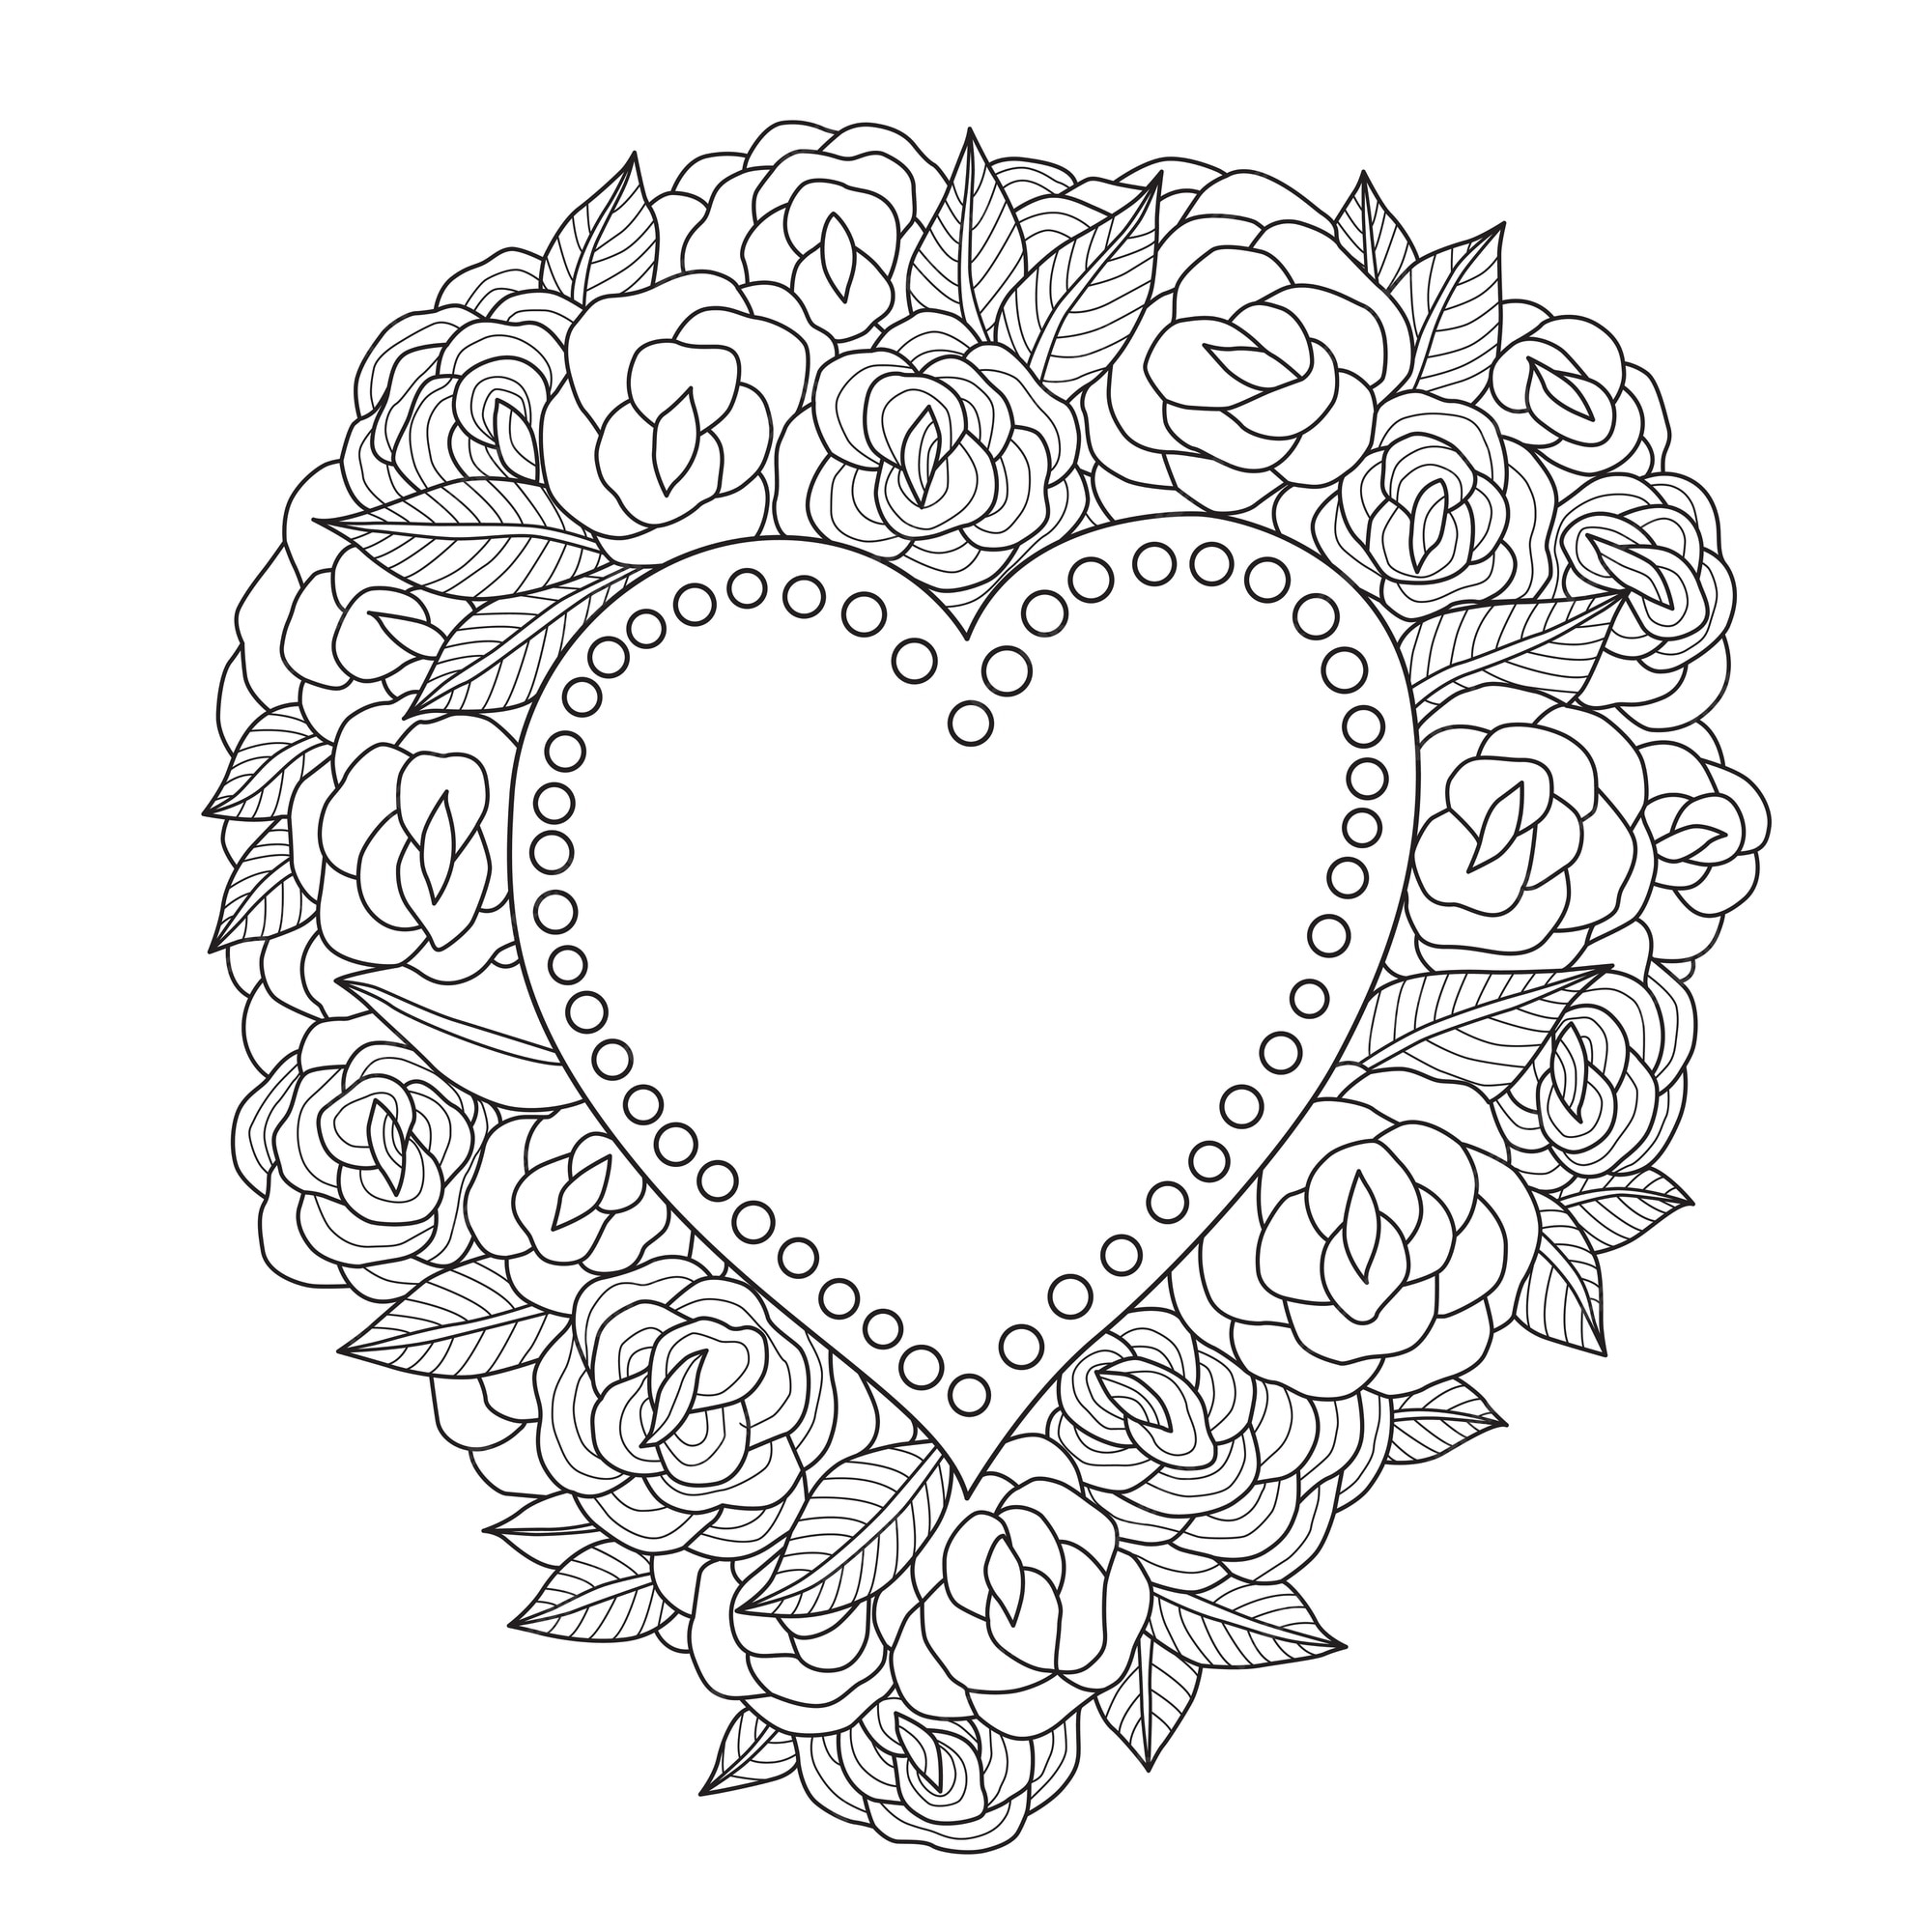 Premium Vector Hand drawn illustration of roses and heart